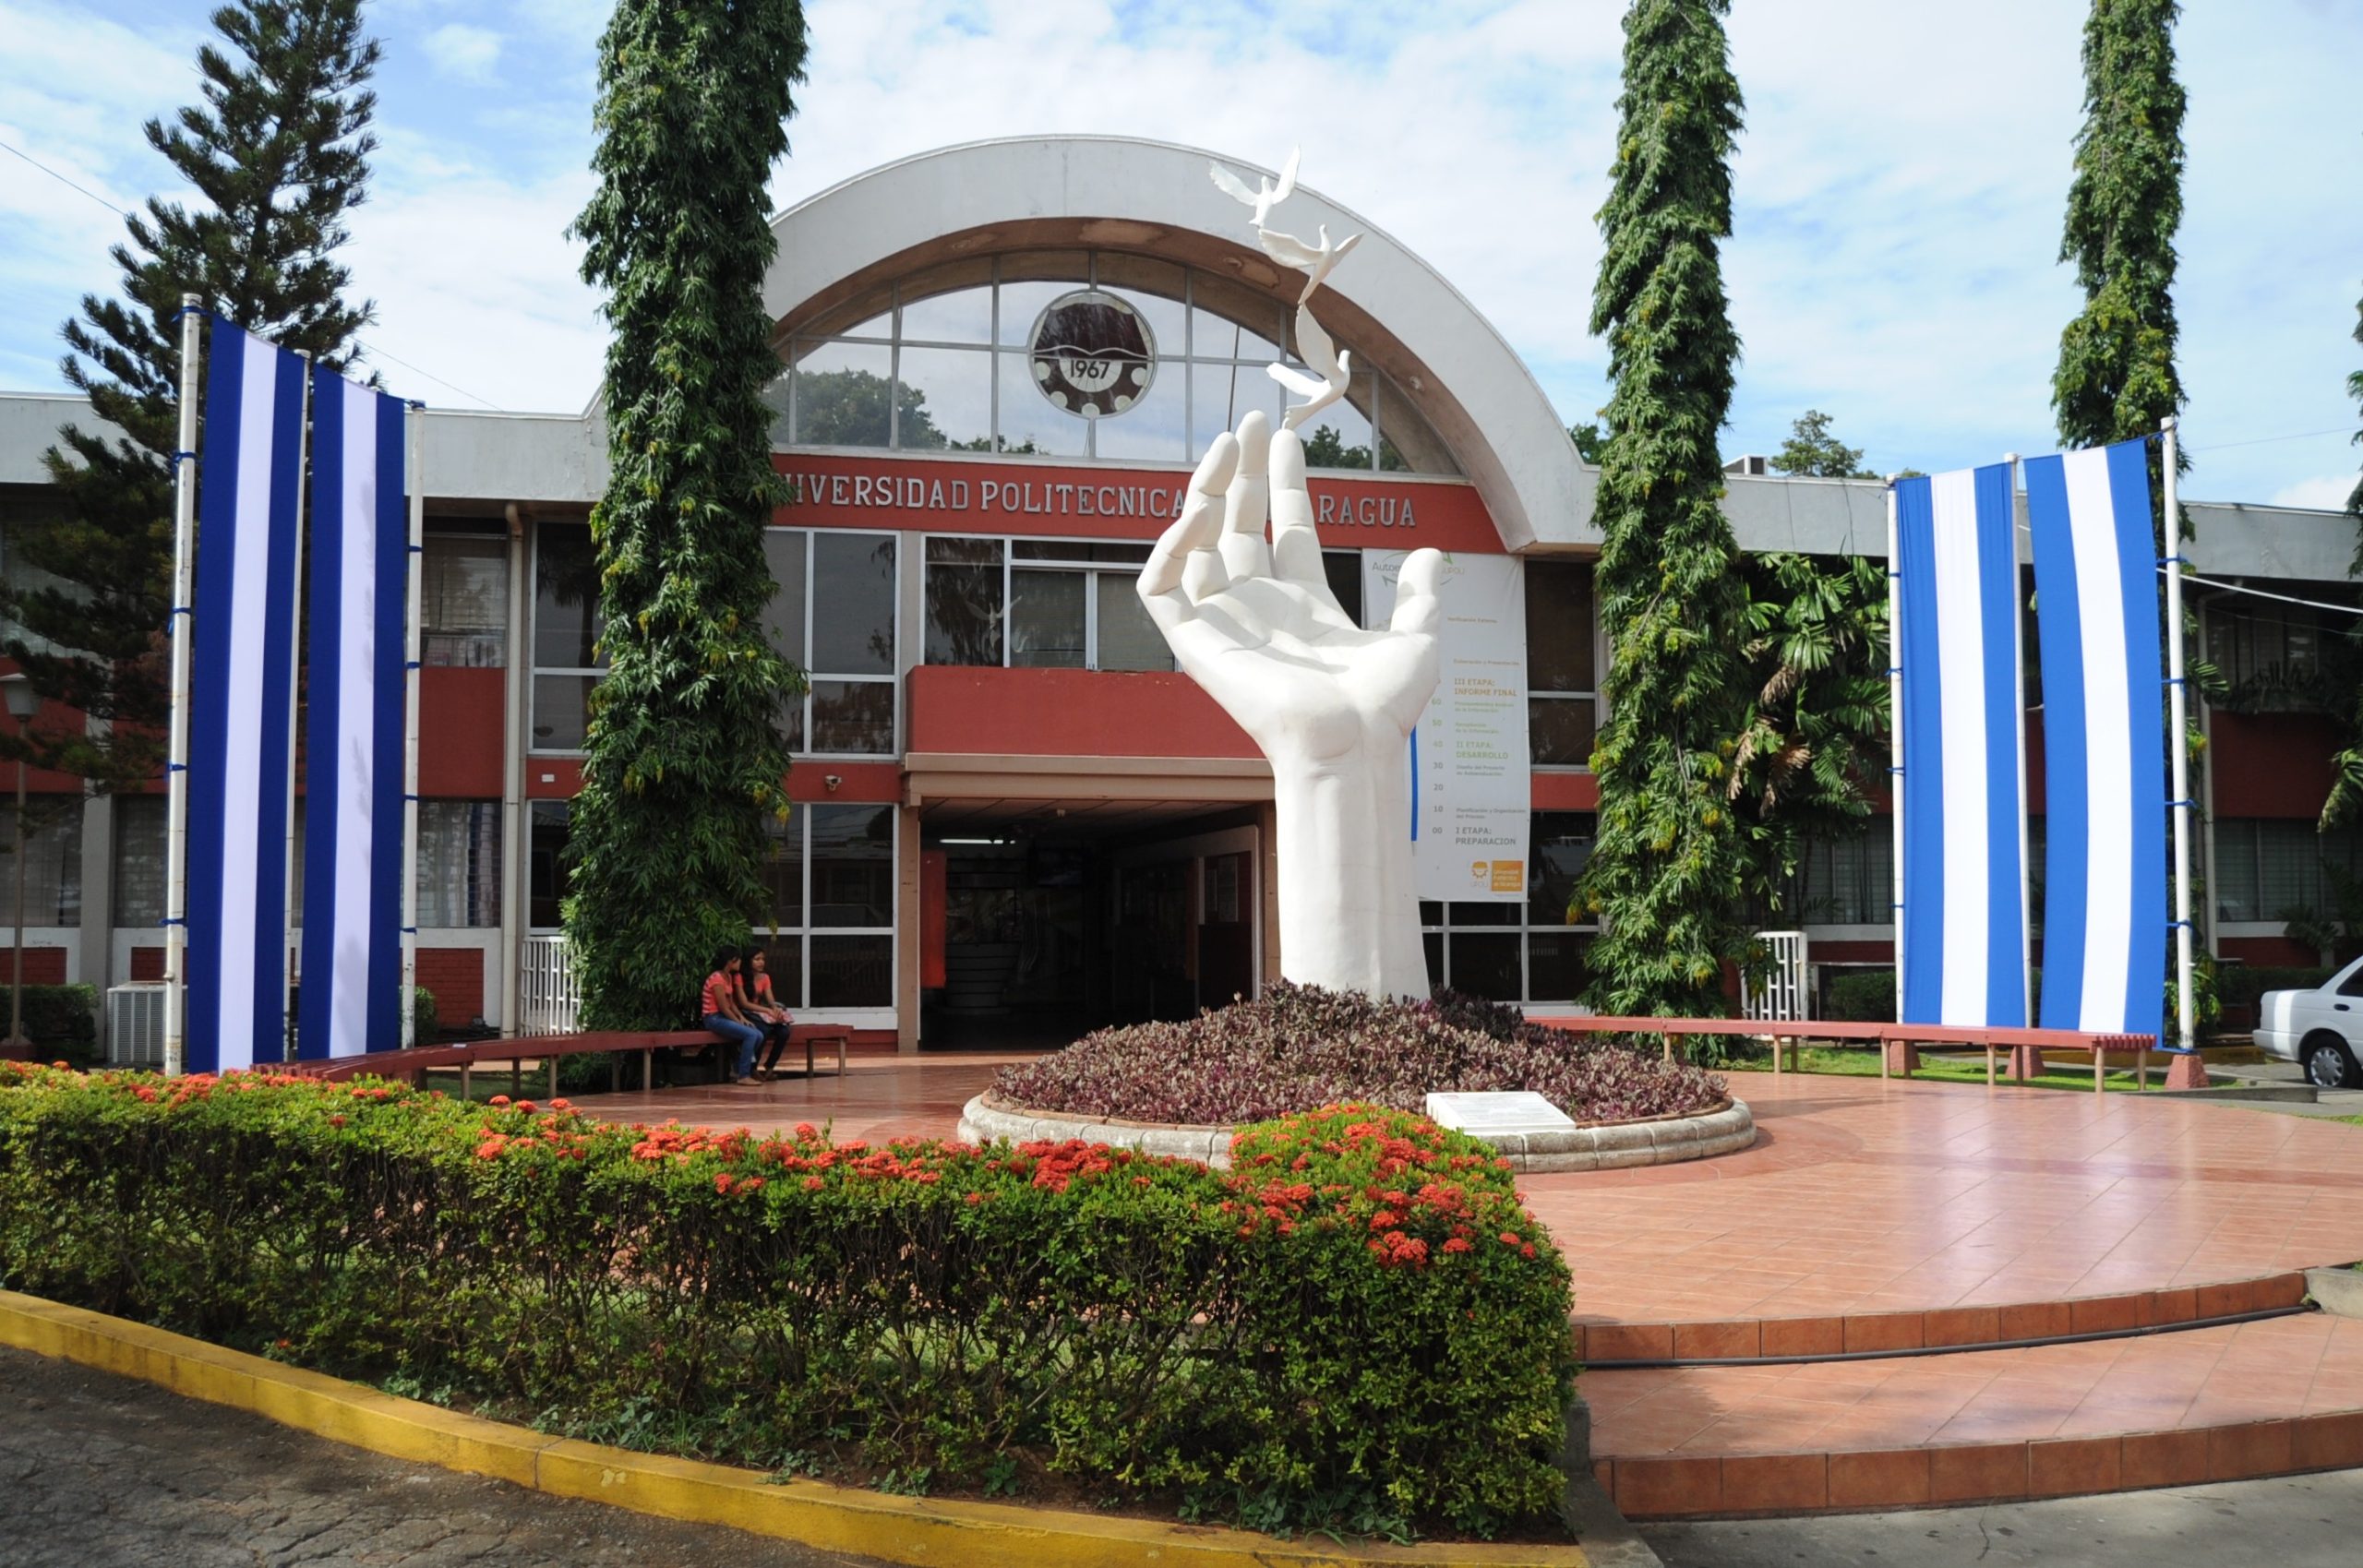 CNU will be made up of the universities created by Ortega